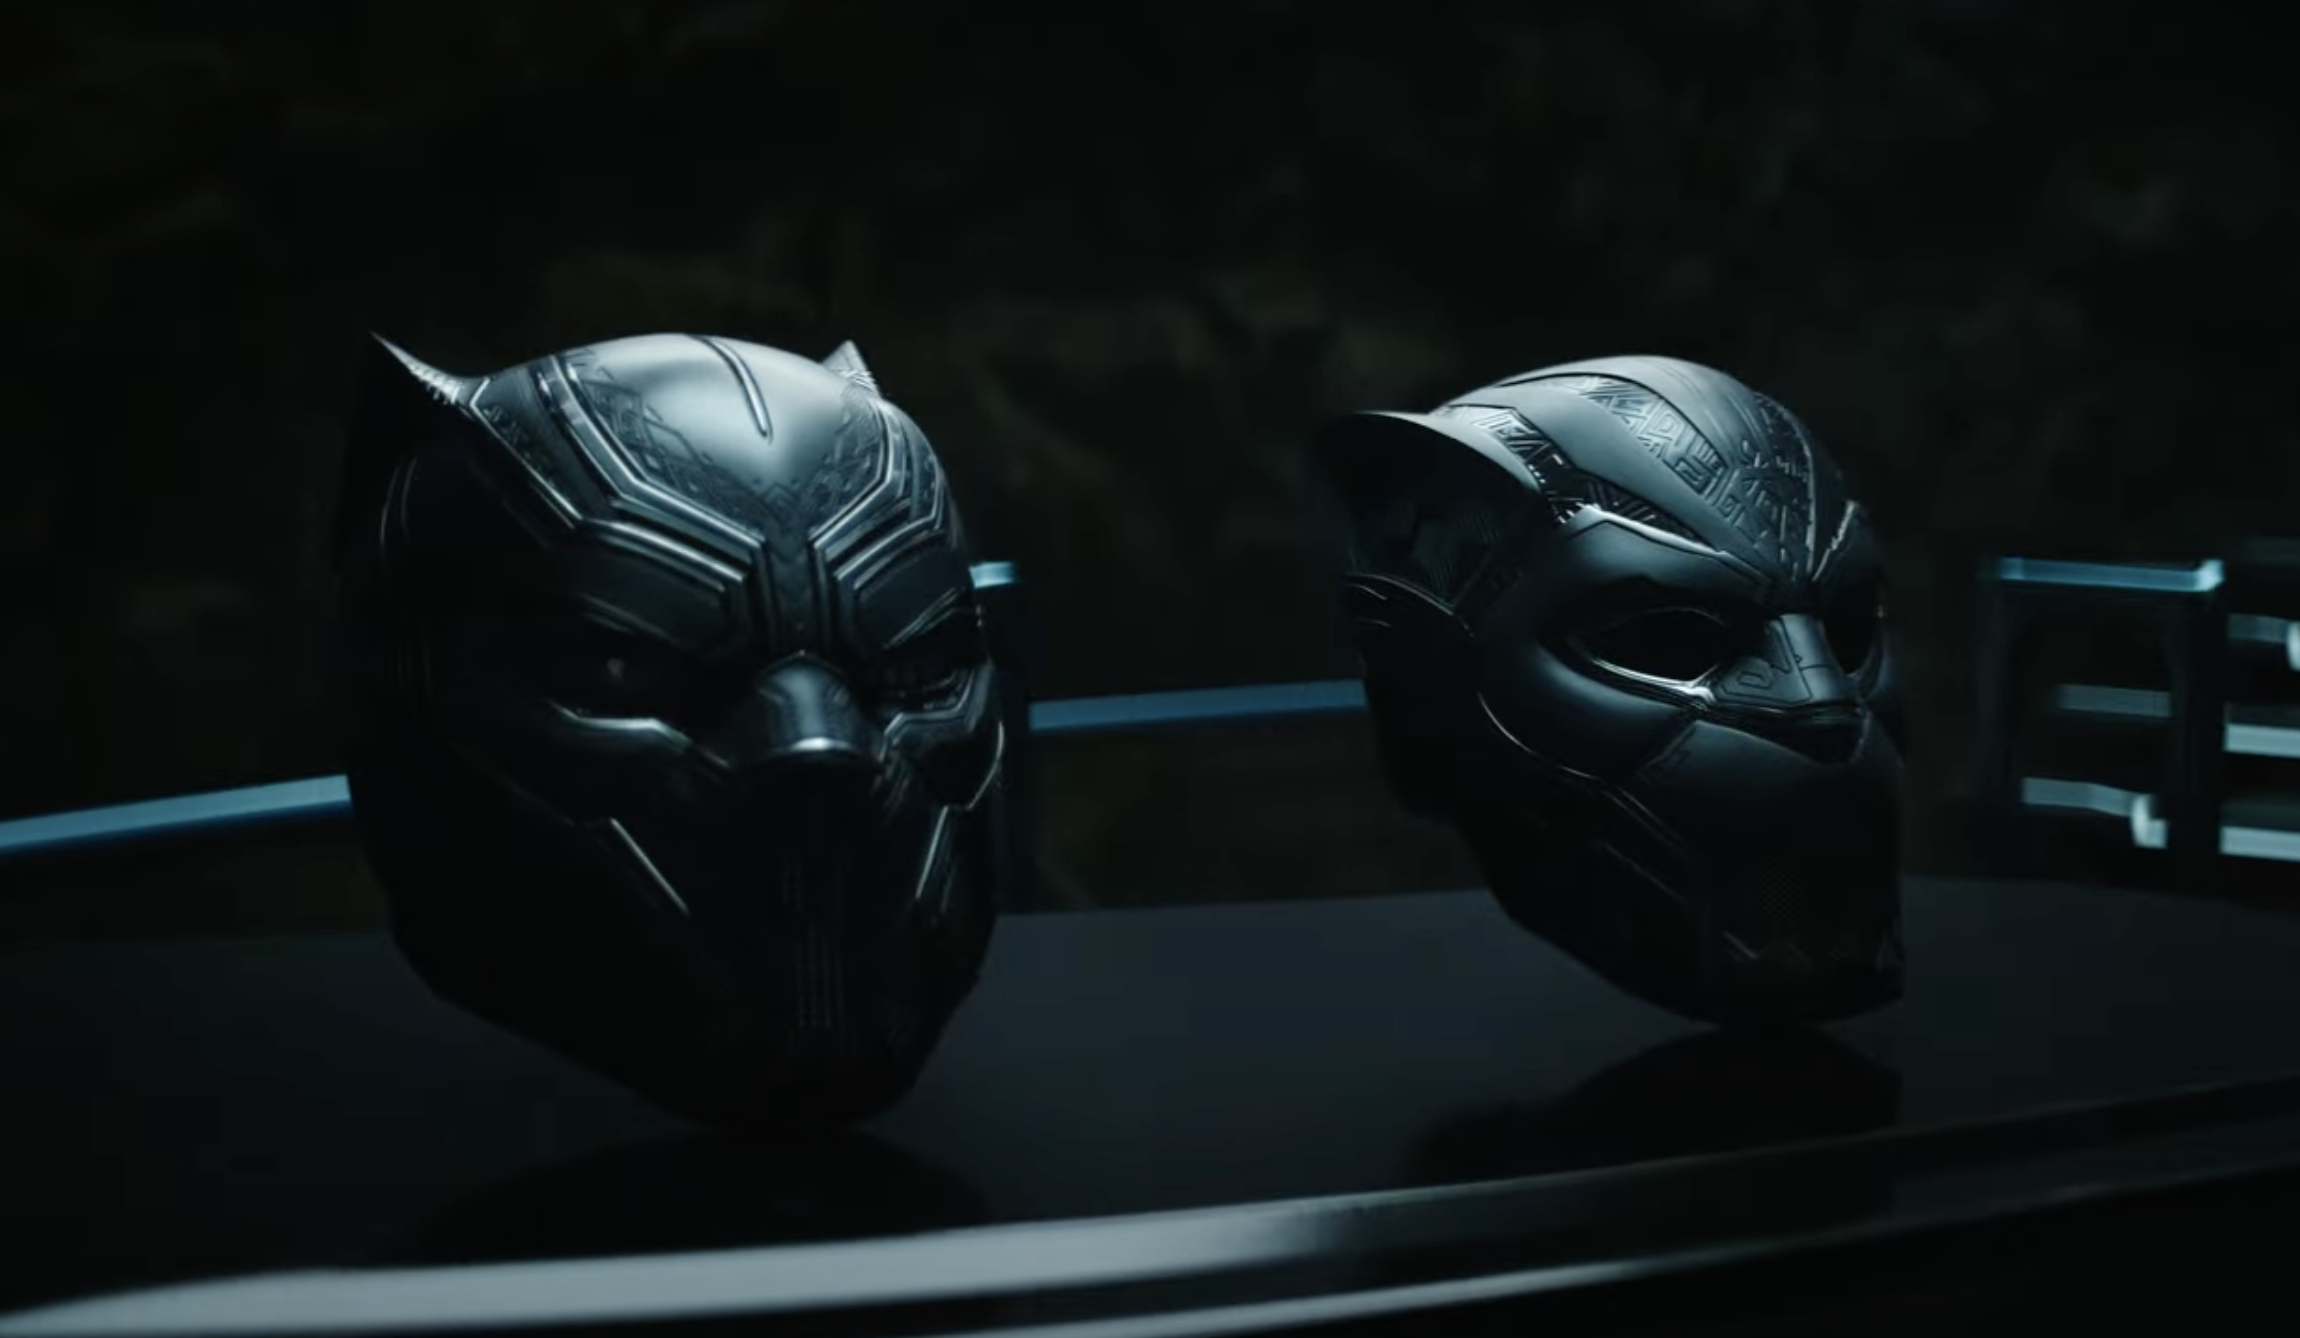 Wakanda Forever promo teases two different Black Panther suits.